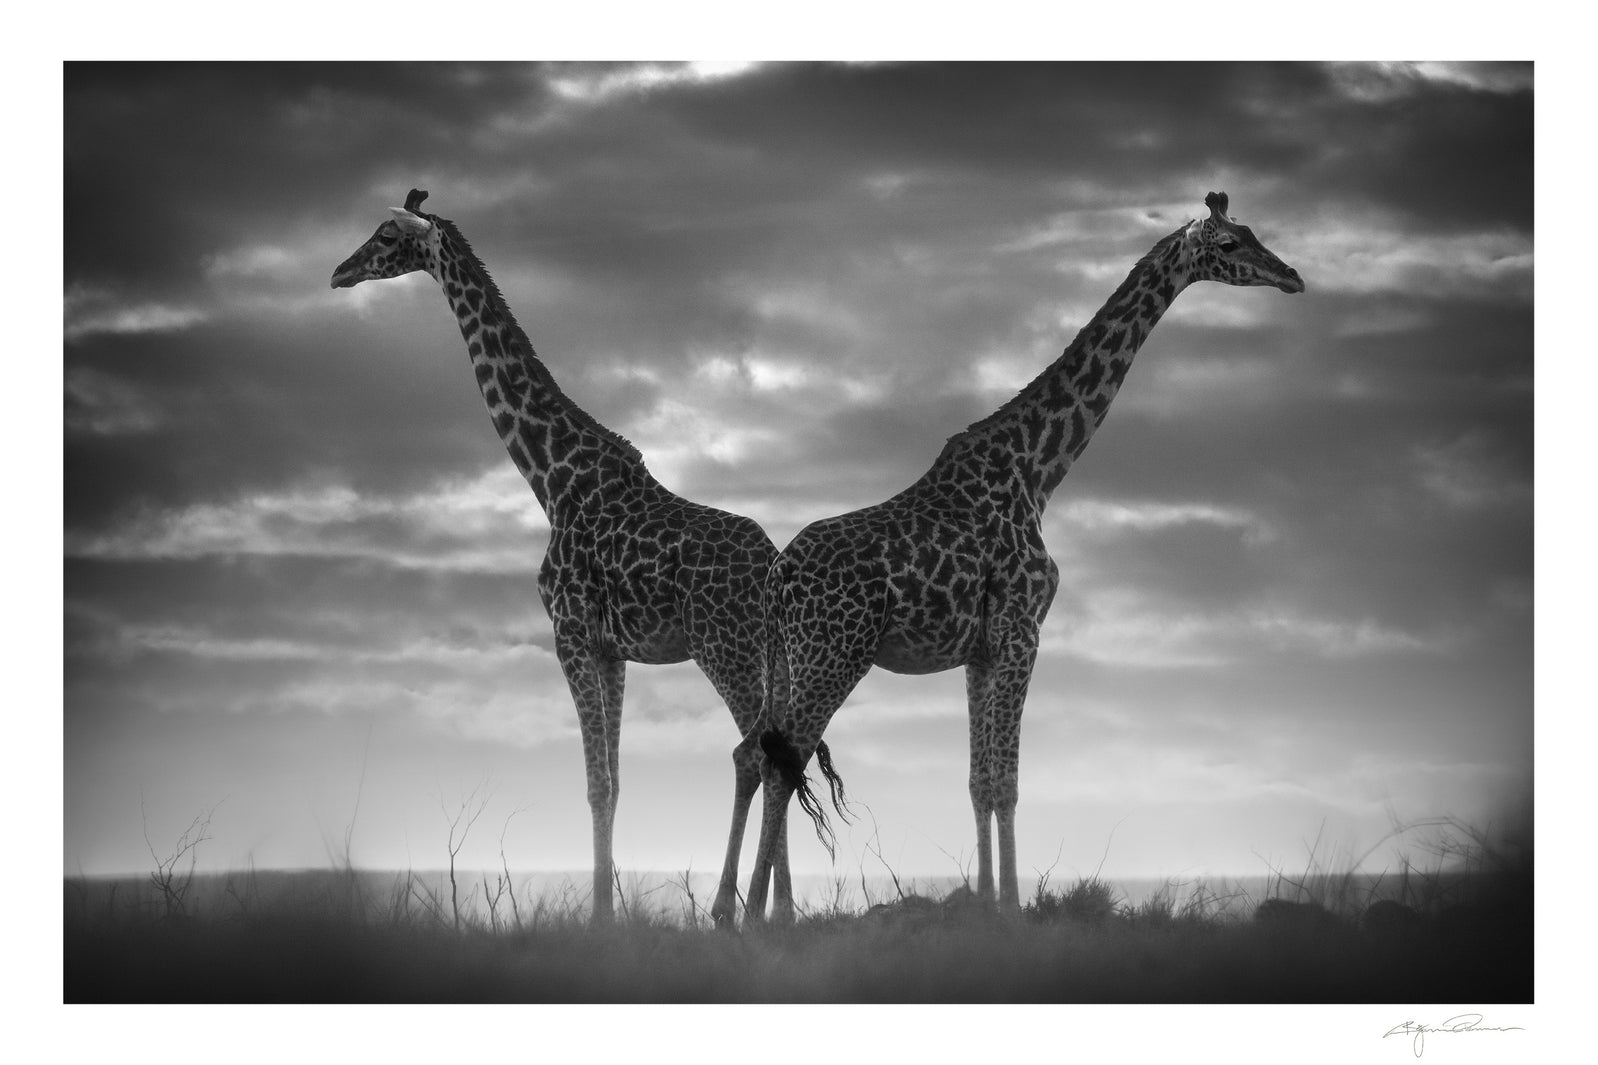 Björn Persson: Illuminating the Soul of Wildlife Through Black and White Photography